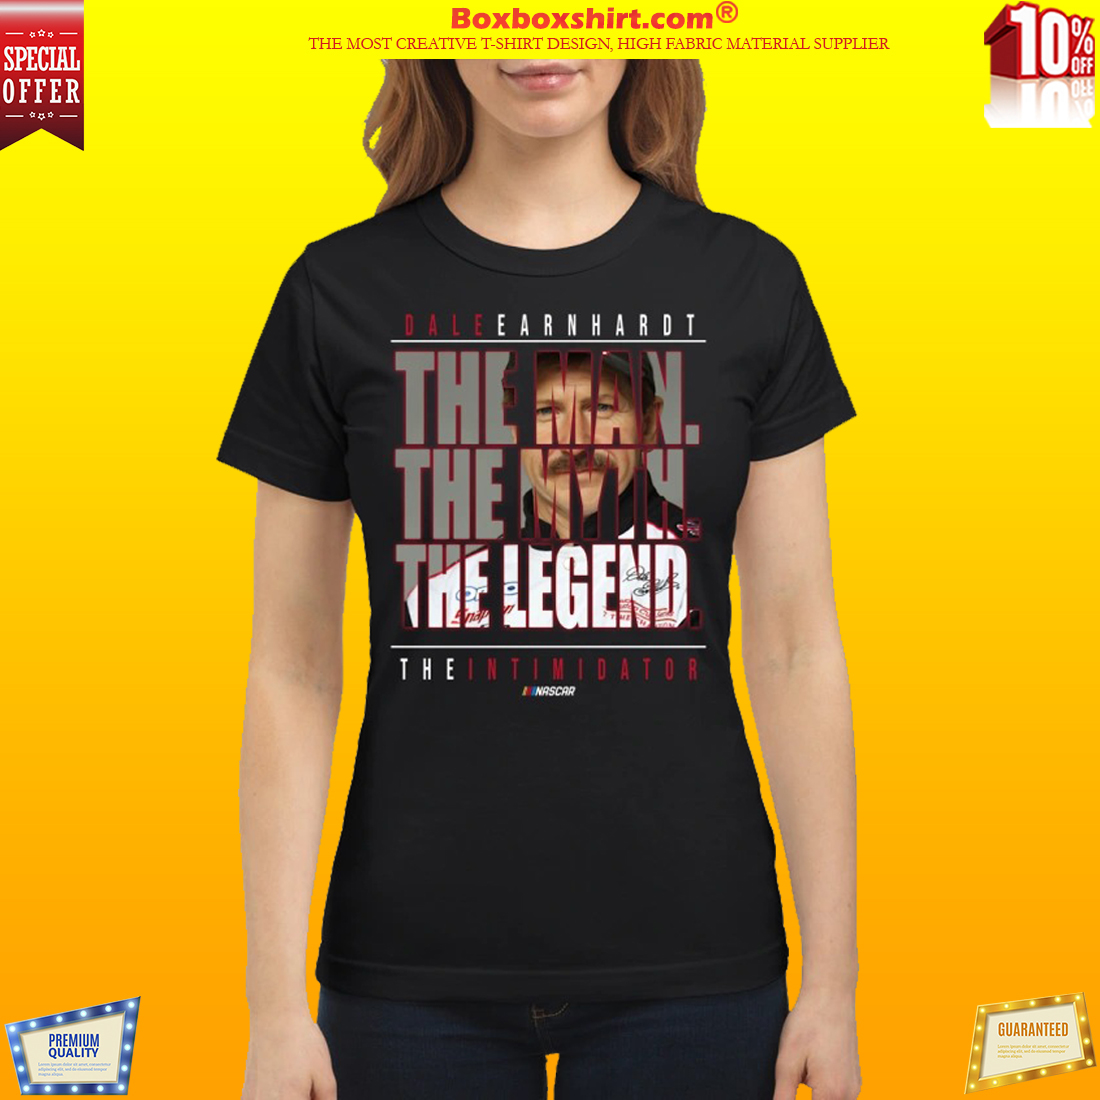 [HOTTEST] Dale Earnhardt the man the myth the legend shirt